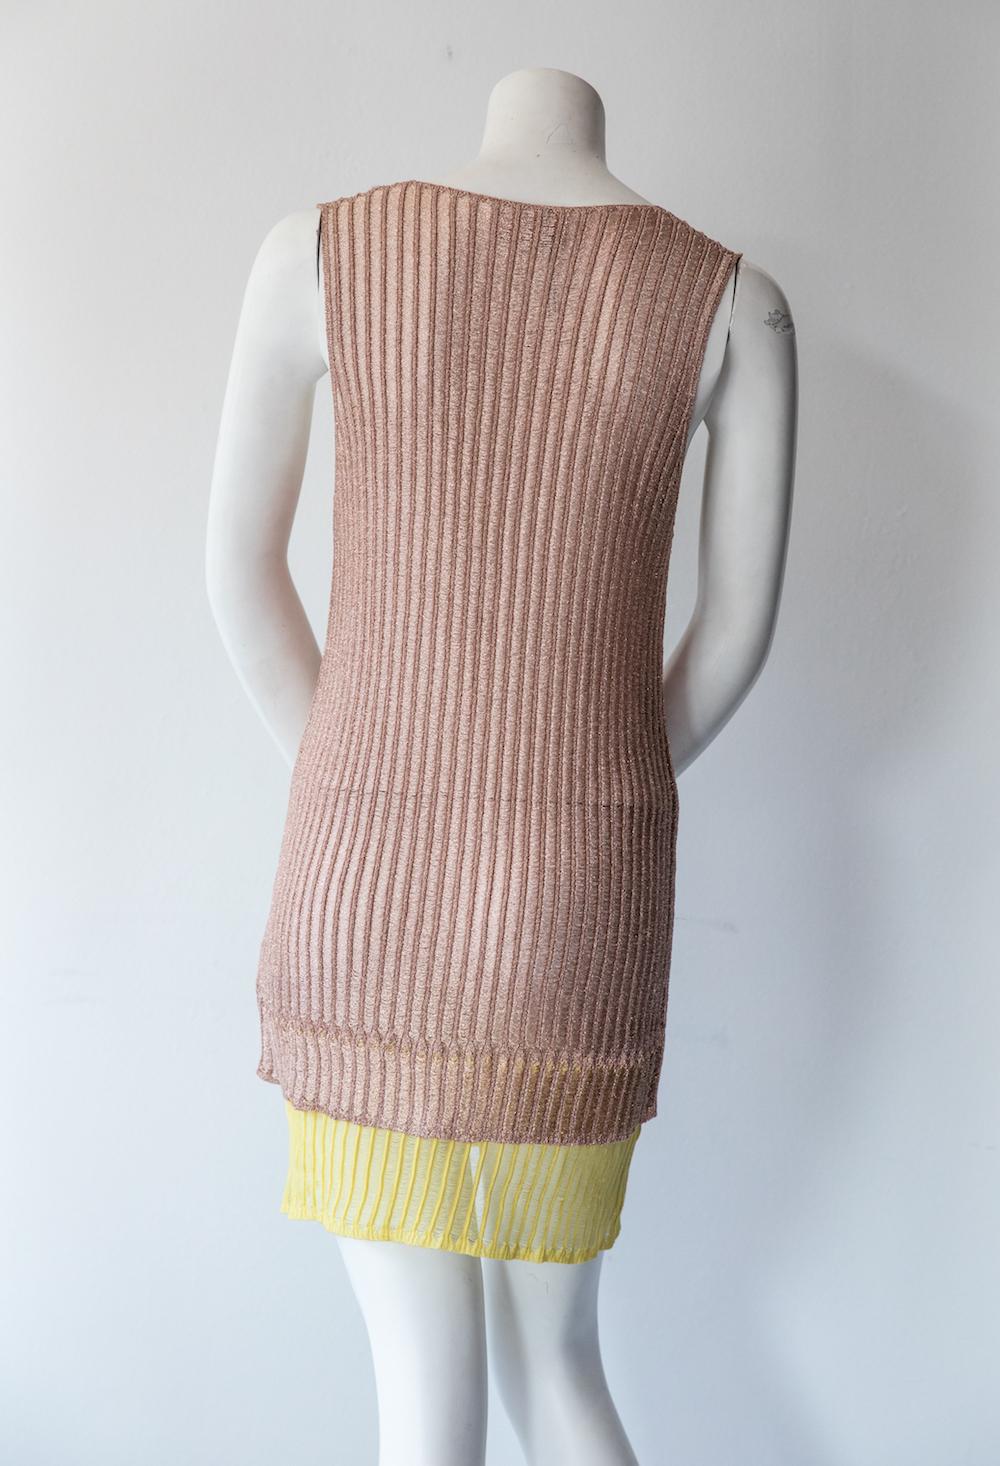 Missoni rose gold knit mini dress. This semi-sheer dress is sleeveless, and has a v-neck with yellow and gold color-blocking at the mid-thigh to create a layered effect. 
Great for resort dressing. 

Size IT 42 / US 6